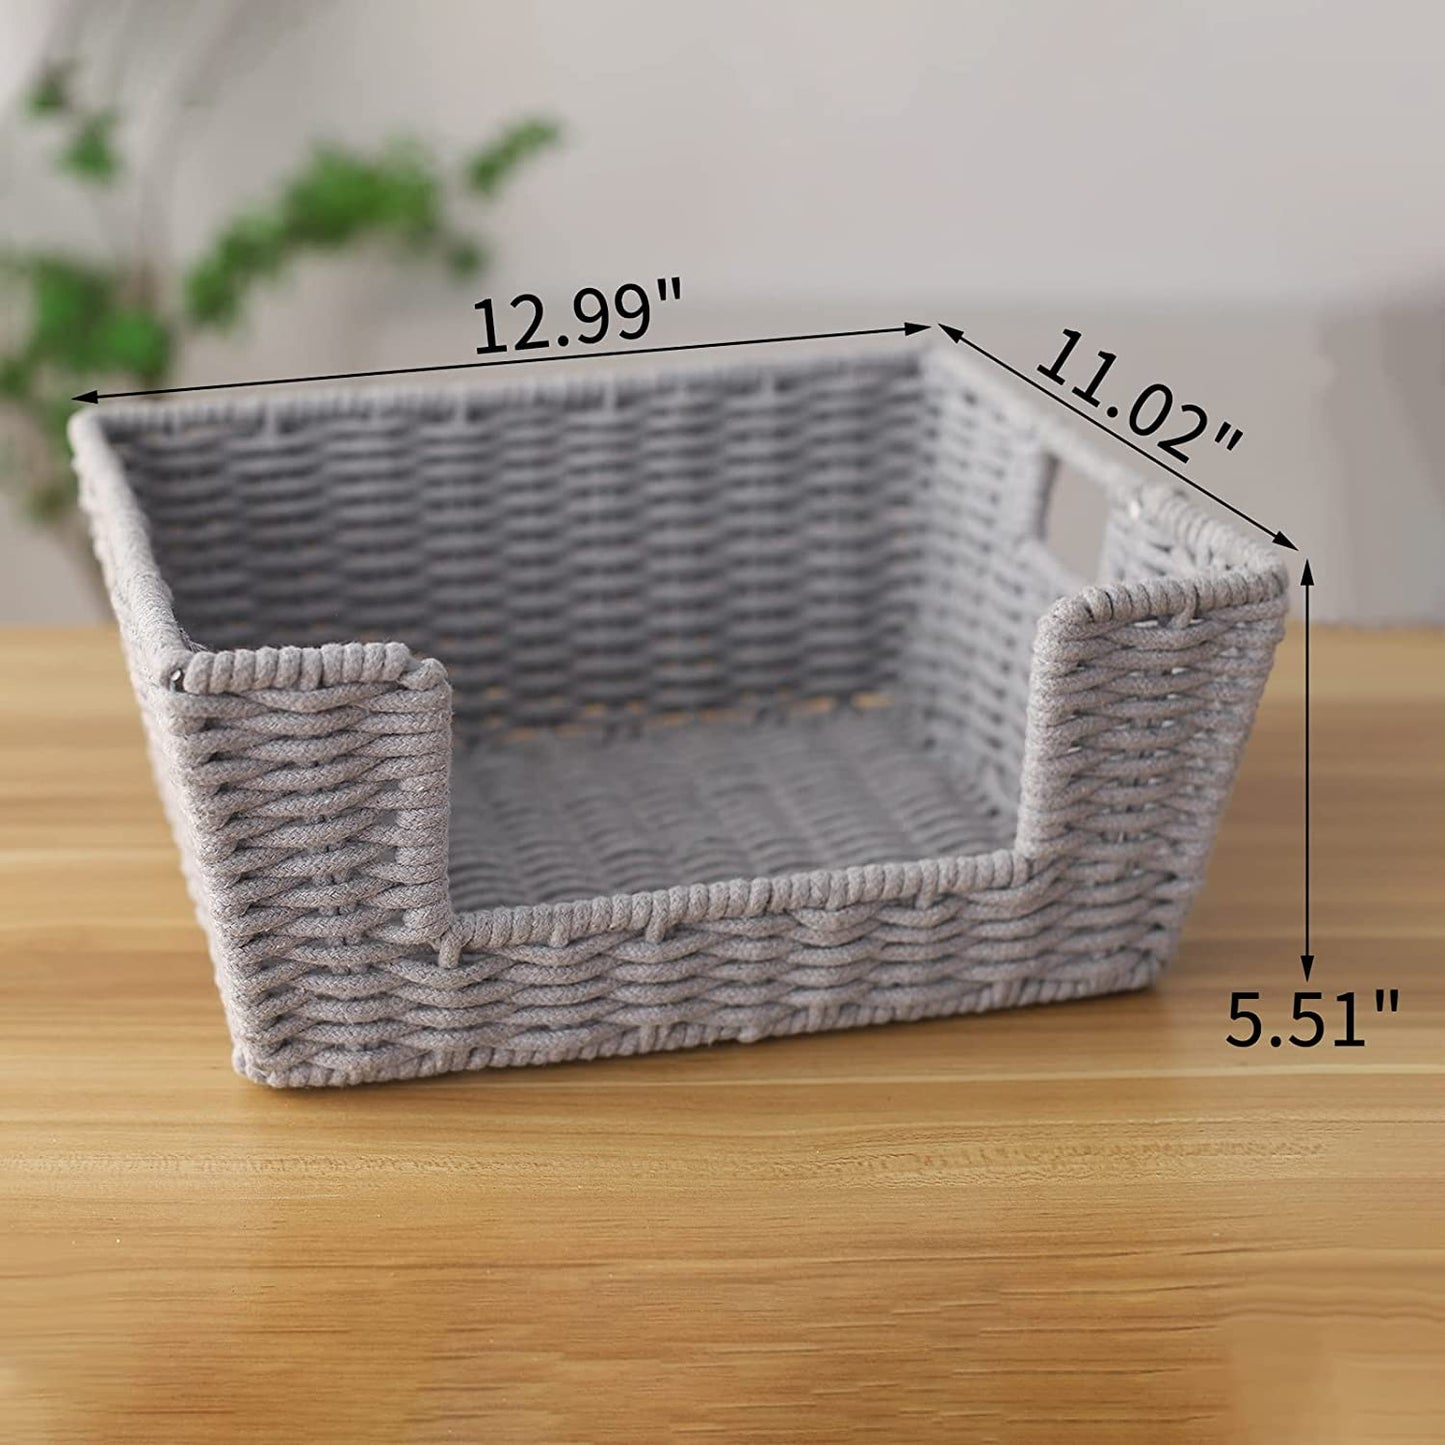 Cotton Rope Storage Basket with Handles Woven Open-Front Baskets Storage Wicker Organizing Baskets for kitchen/Bathroom/Bedroom/Laundry Room/Pantry (Gray)